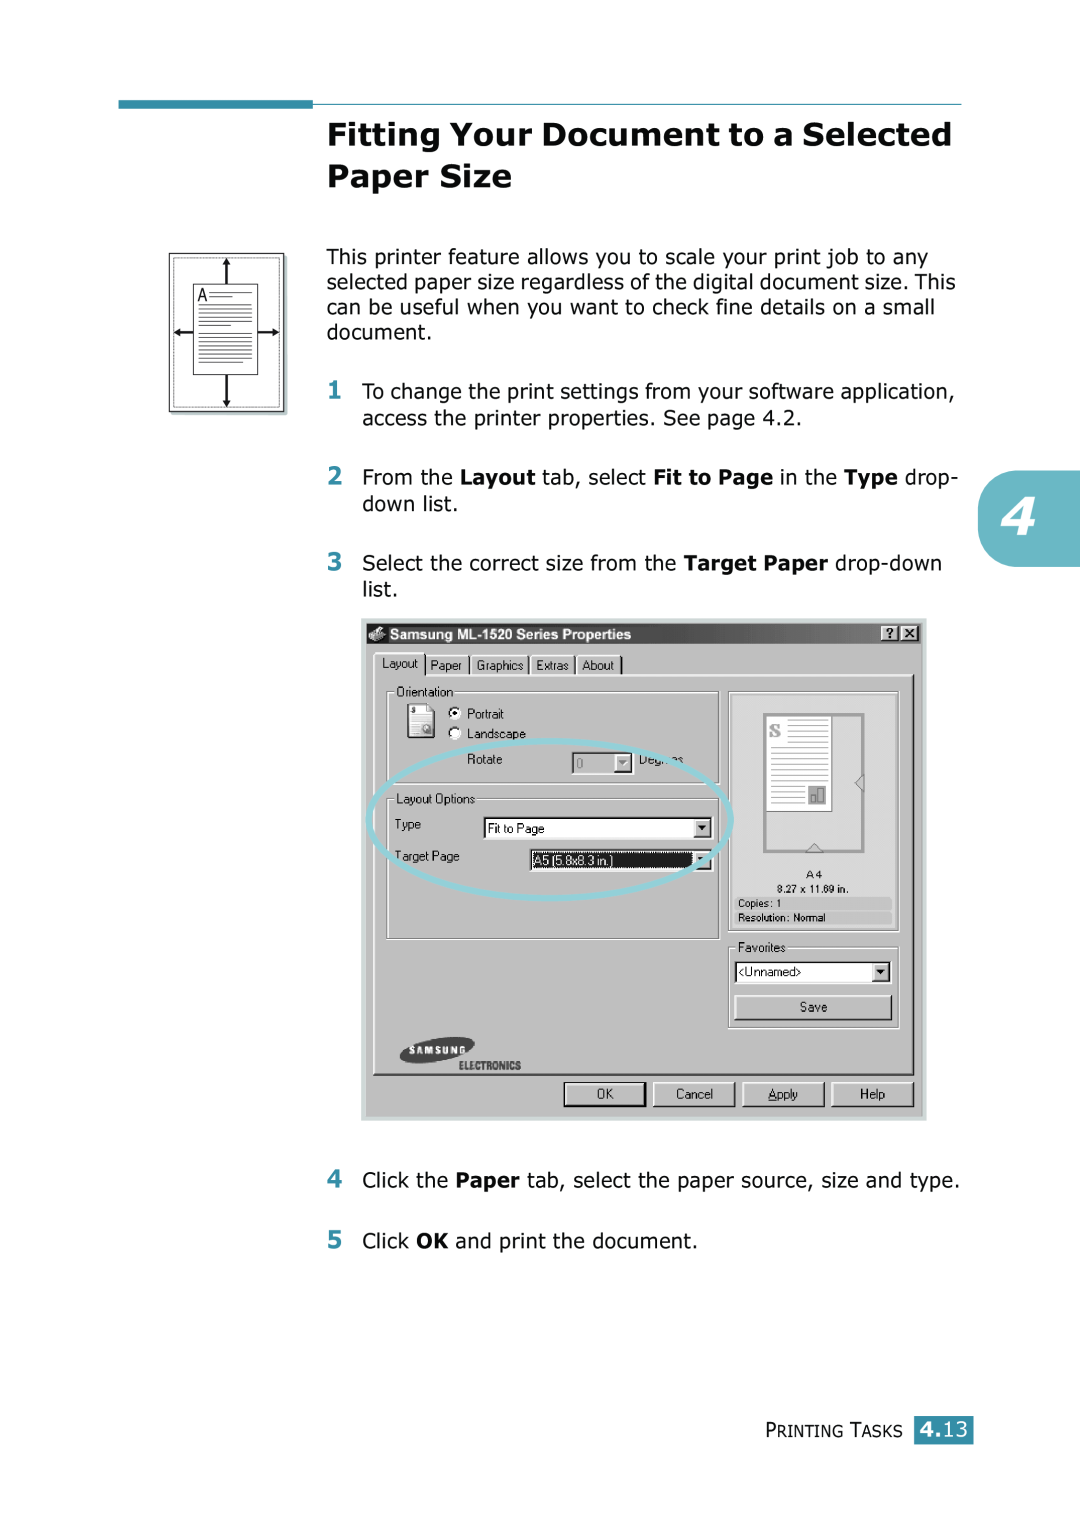 Samsung ML-1520 manual Fitting Your Document to a Selected Paper Size 